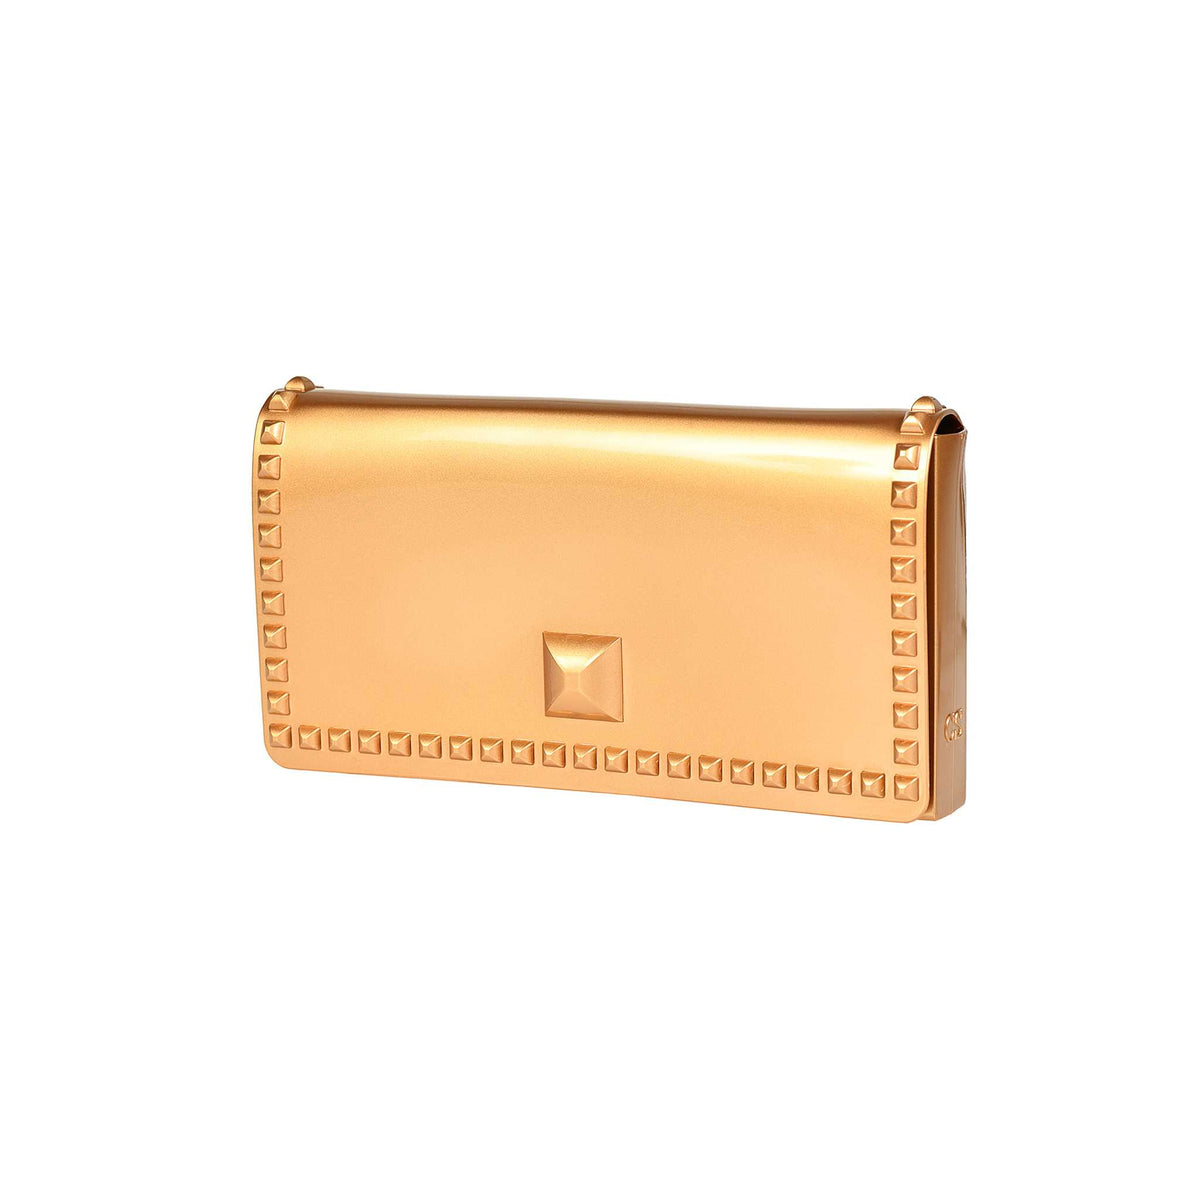 Rose gold Carmen Sol jelly purses perfect for any outfit